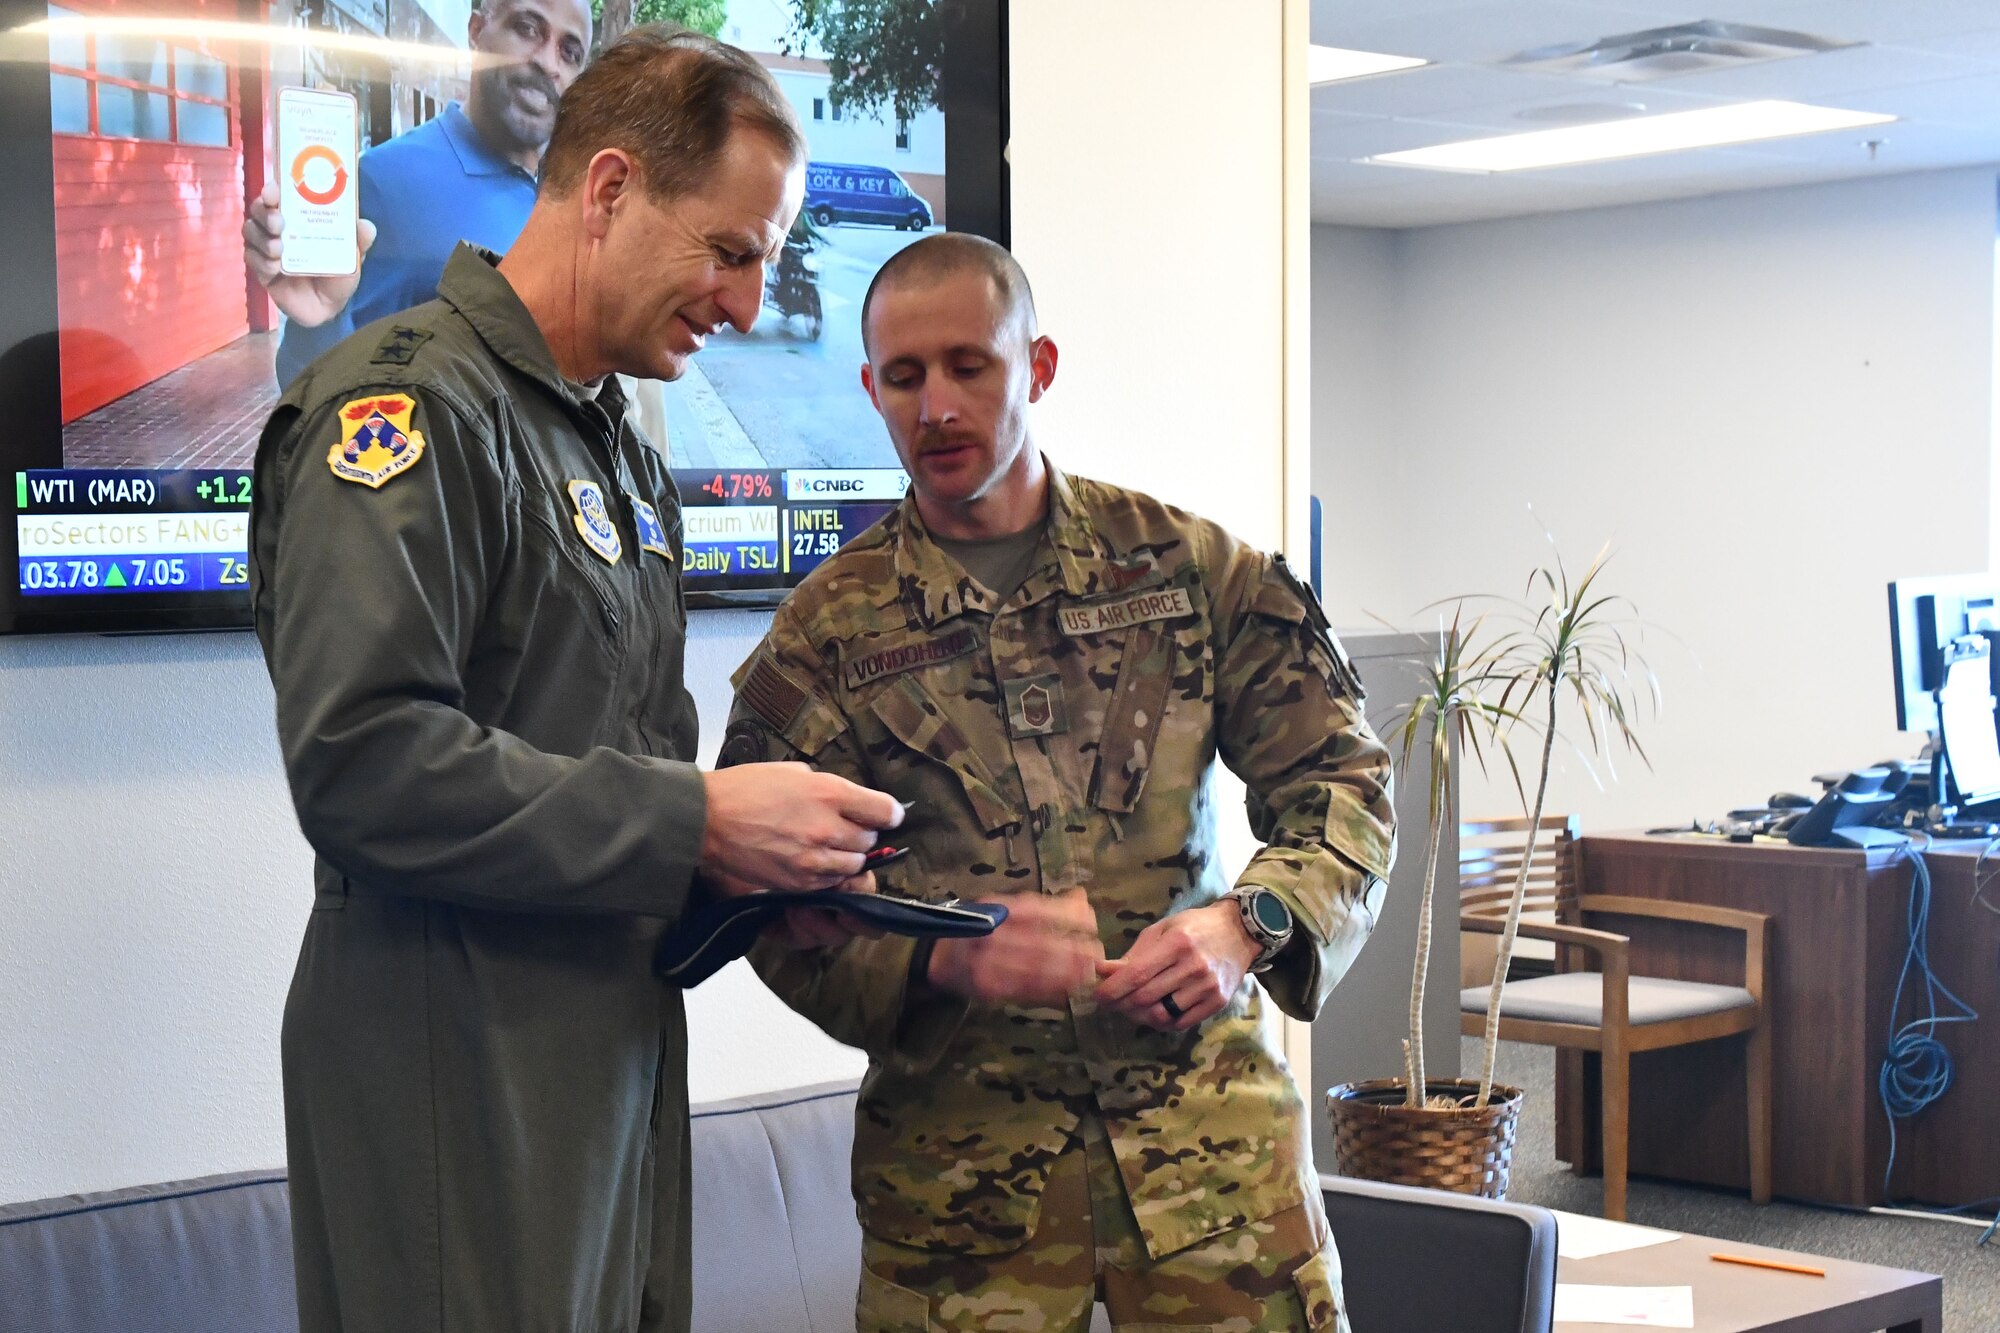 U.S. Air Force Maj. Gen. Corey Martin views a boom operator coin given to him by Senior Master Sgt. Joseph Vondohlen, 56th Air Refueling Squadron senior enlisted leader, at Altus Air Force Base, Oklahoma, Jan. 26, 2023. One side of the coin features a KC-46 Pegasus boom overlapping a shield and a Boom Operator Association heritage logo on the other side. (U.S. Air Force photo by Airman 1st Class Miyah Gray)